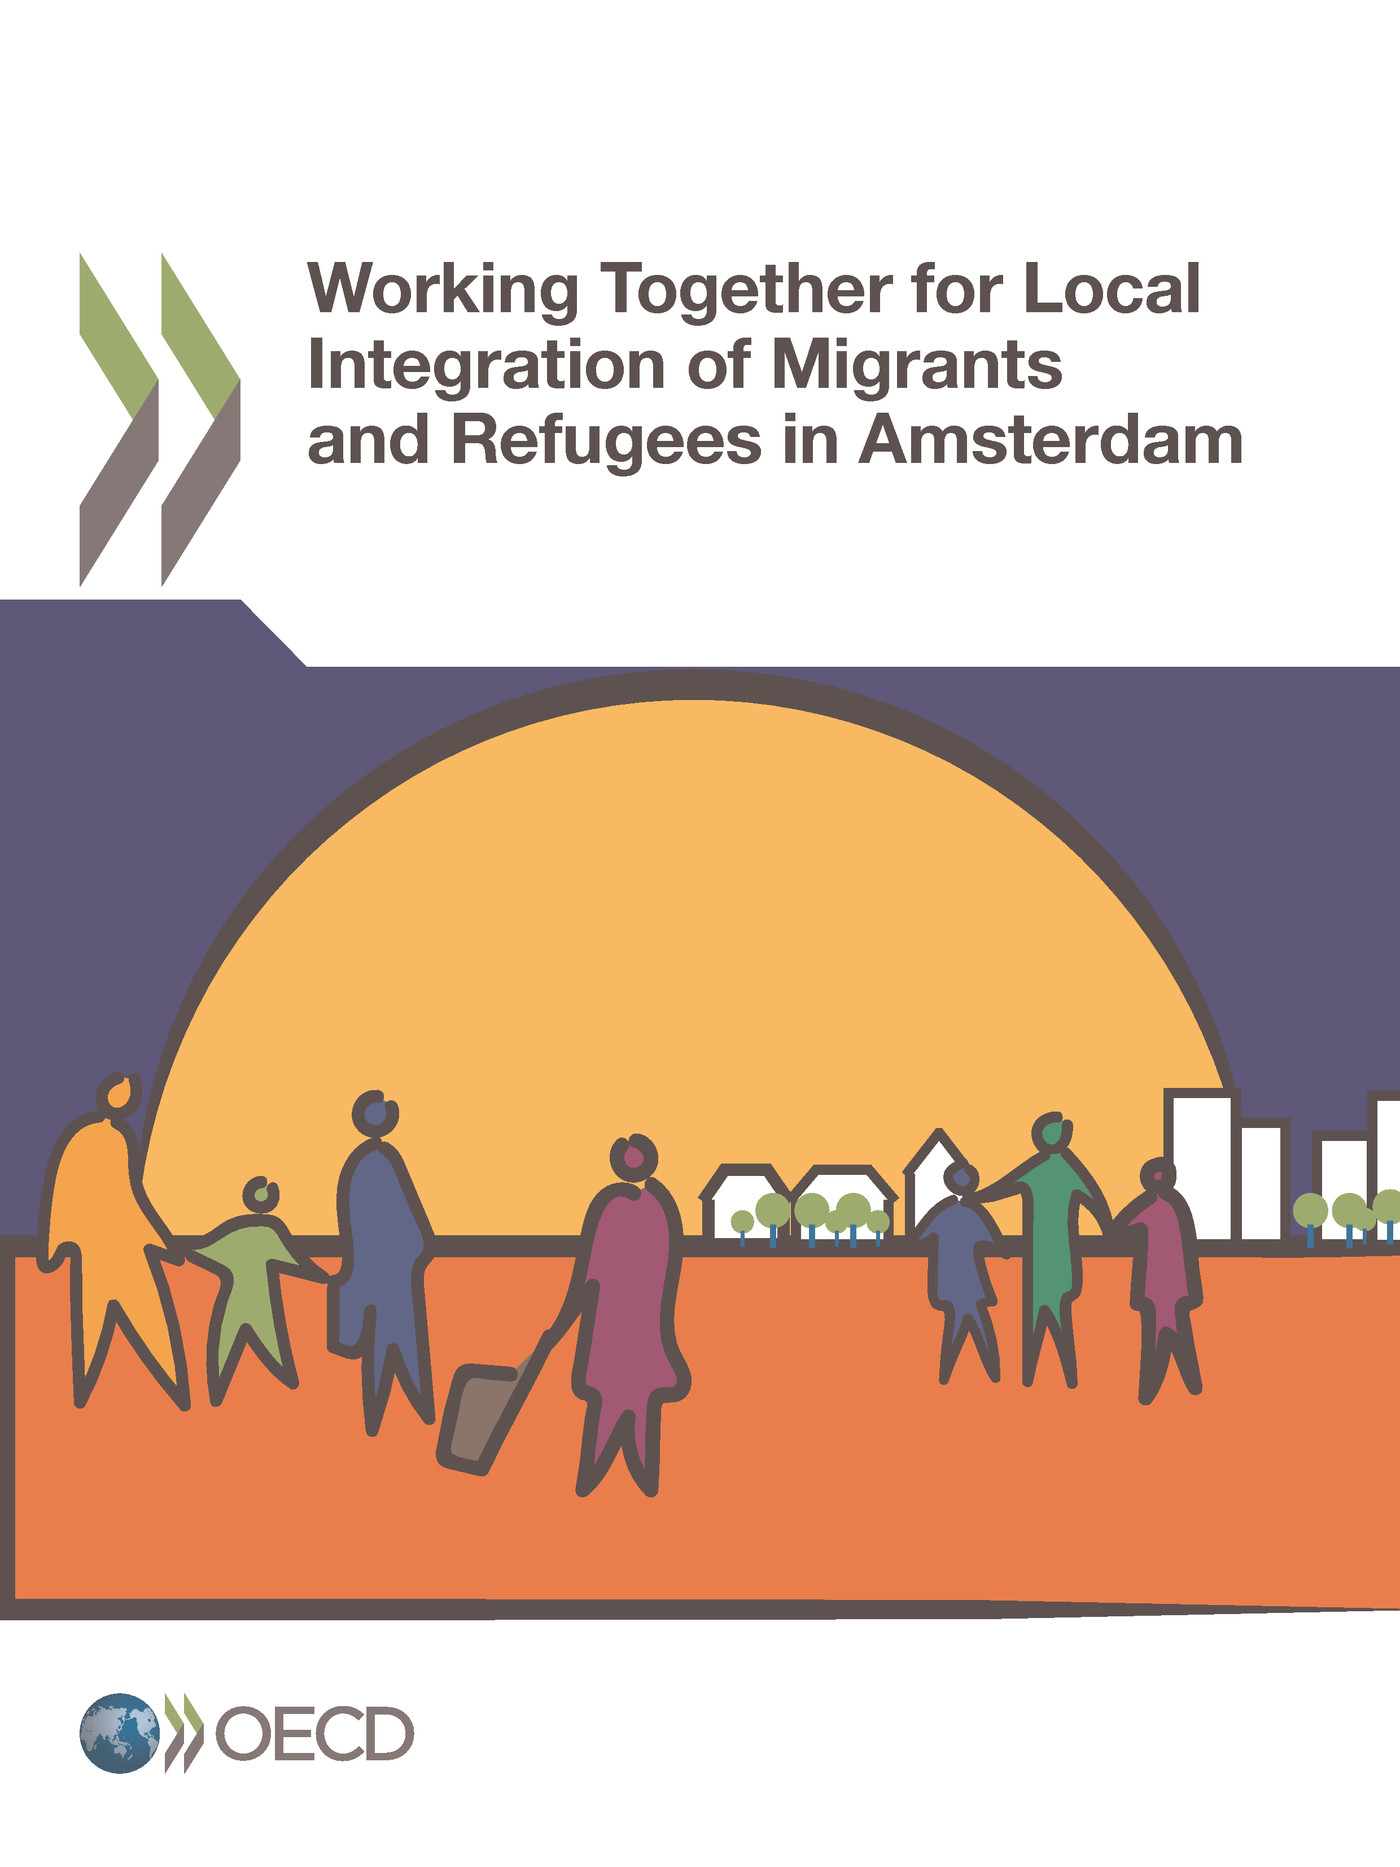 Working Together for Local Integration of Migrants and Refugees in Amsterdam -  Collectif - OCDE / OECD